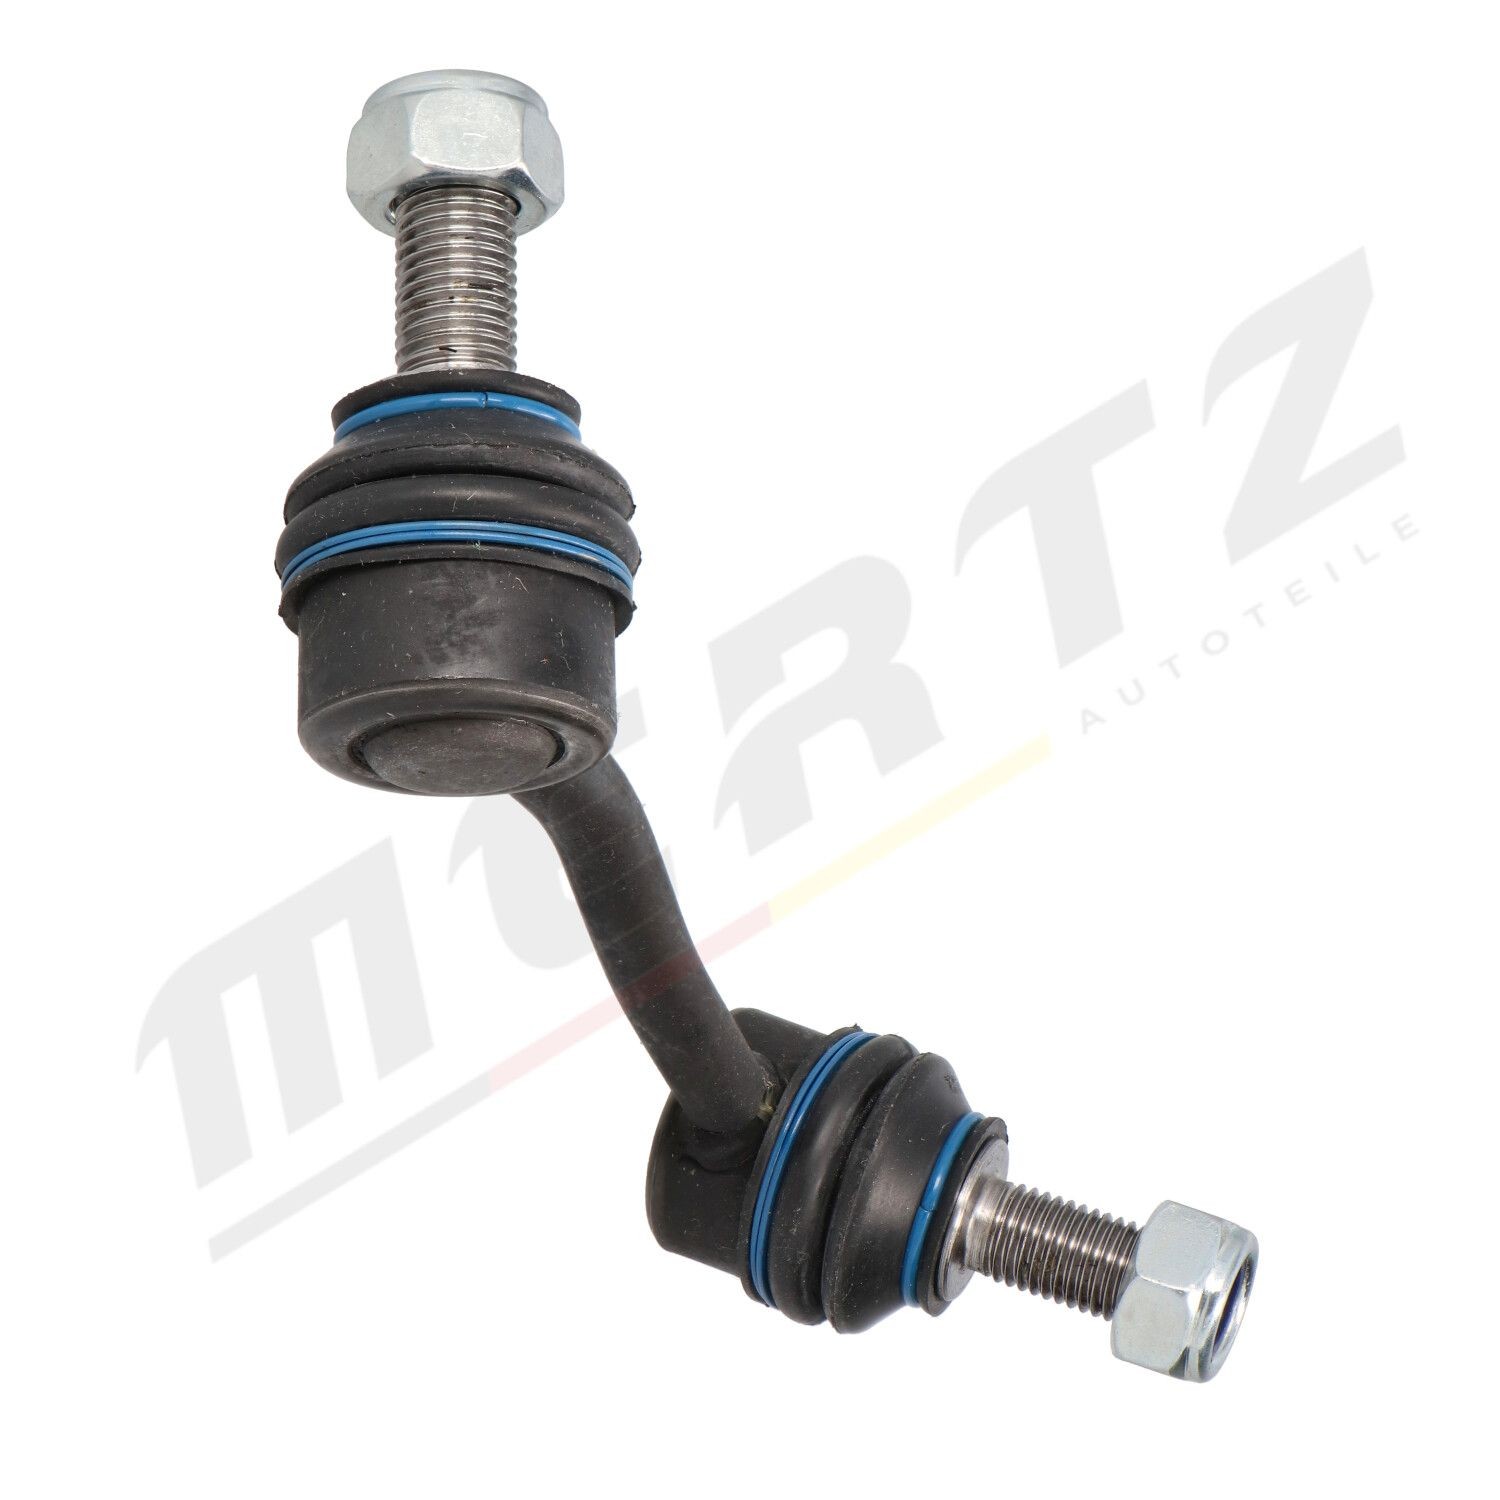 M-S0050 Anti-roll bar linkage M-S0050 MERTZ Front Axle Left, 138mm, M12x1,5 , with nut, Metal